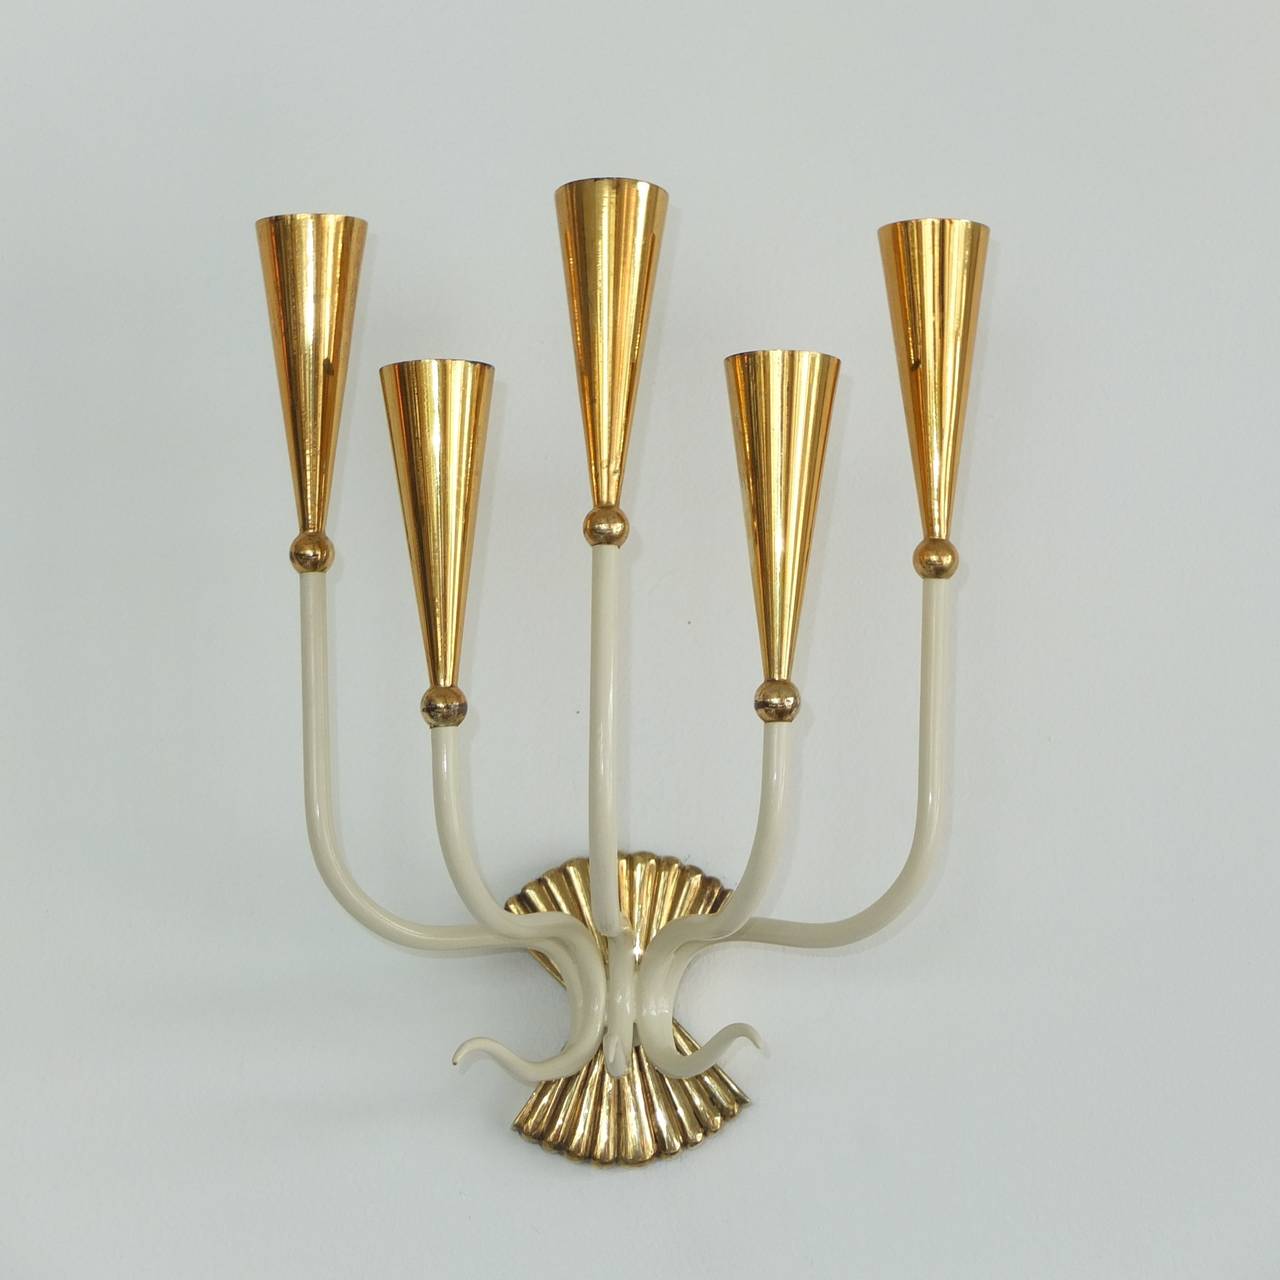 Extraordinary pair of nuova-classical 5 arm sconces in the manner of Paolo Buffa.

Each takes five candelabra screw socket bulbs. See detail images with a variety of bulbs.